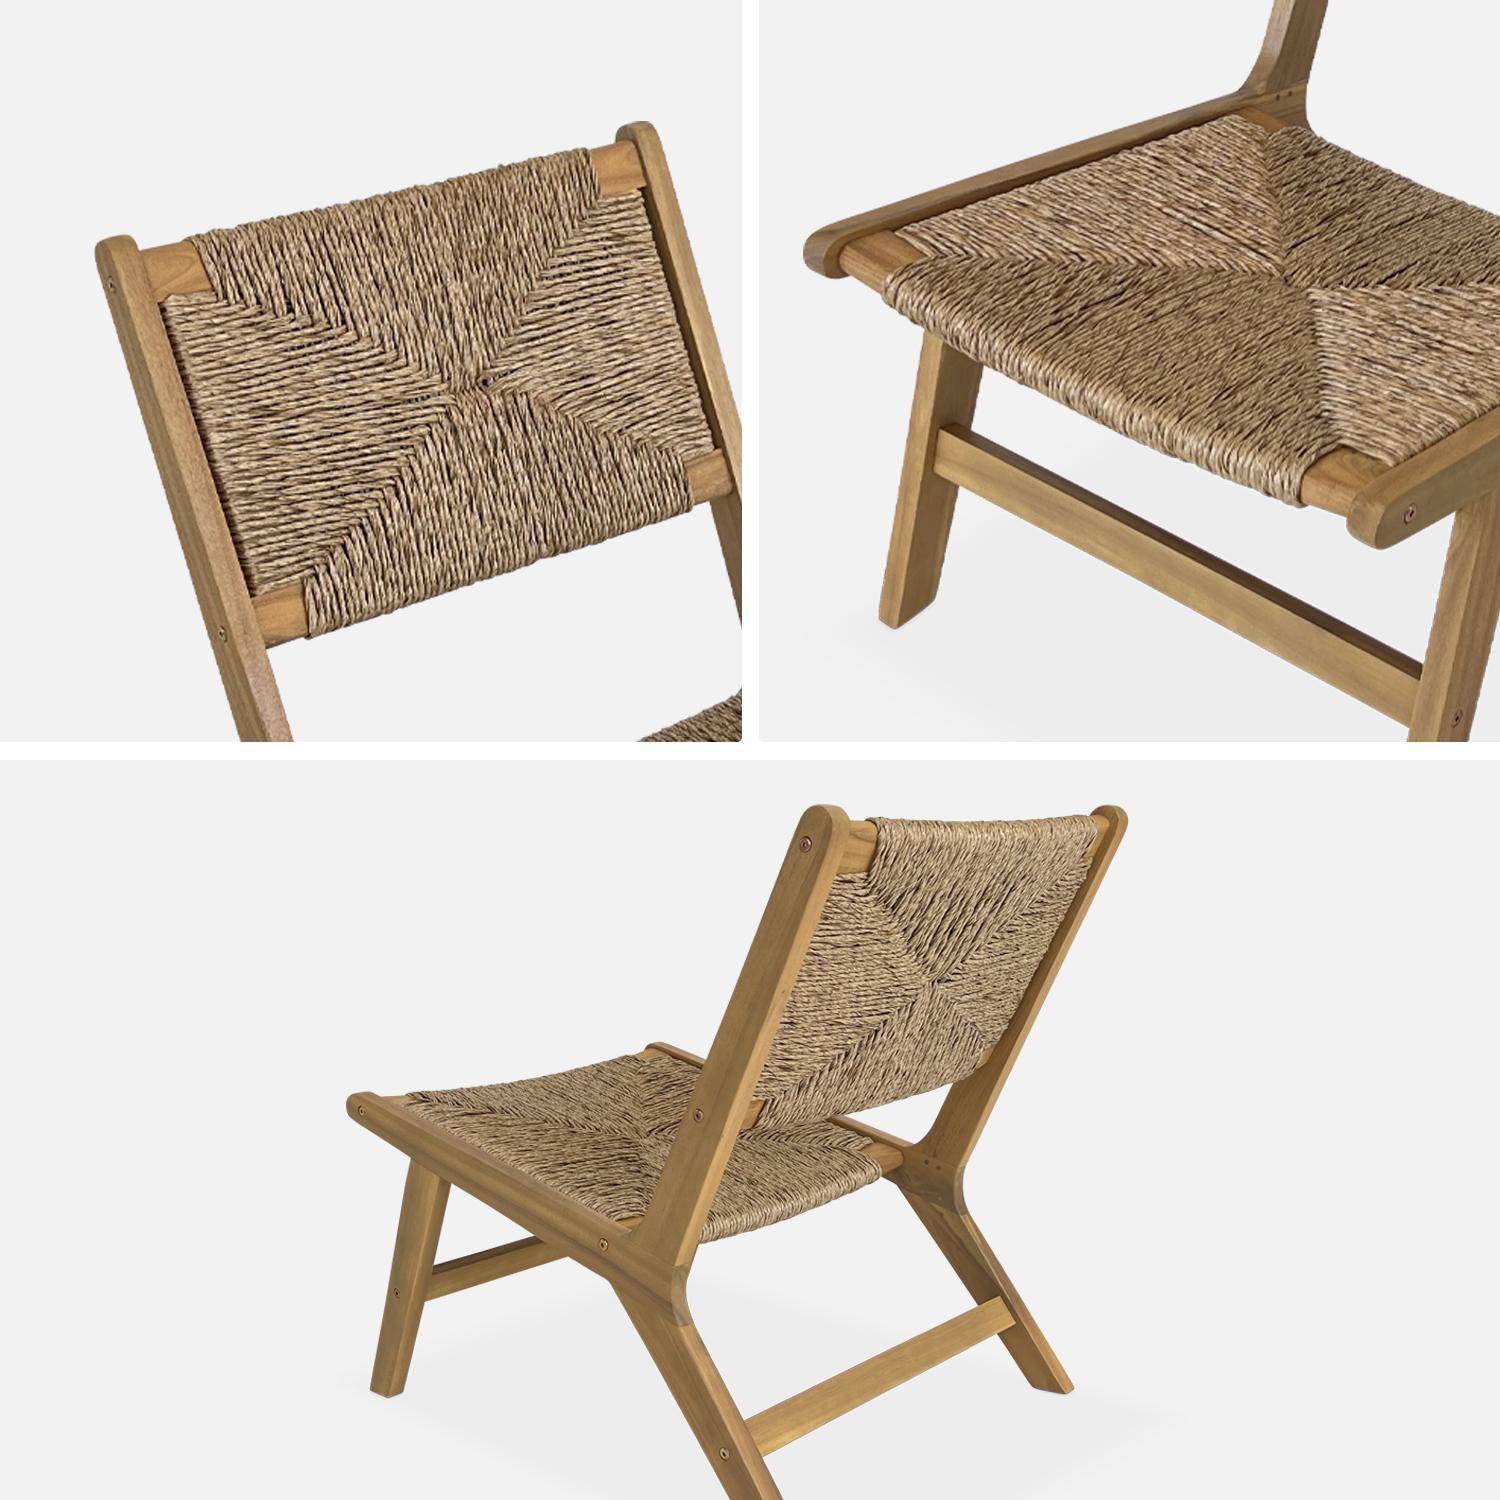 Relaxing garden chair, wood and straw-like resin, Indoor/Outdoor, natural Photo7